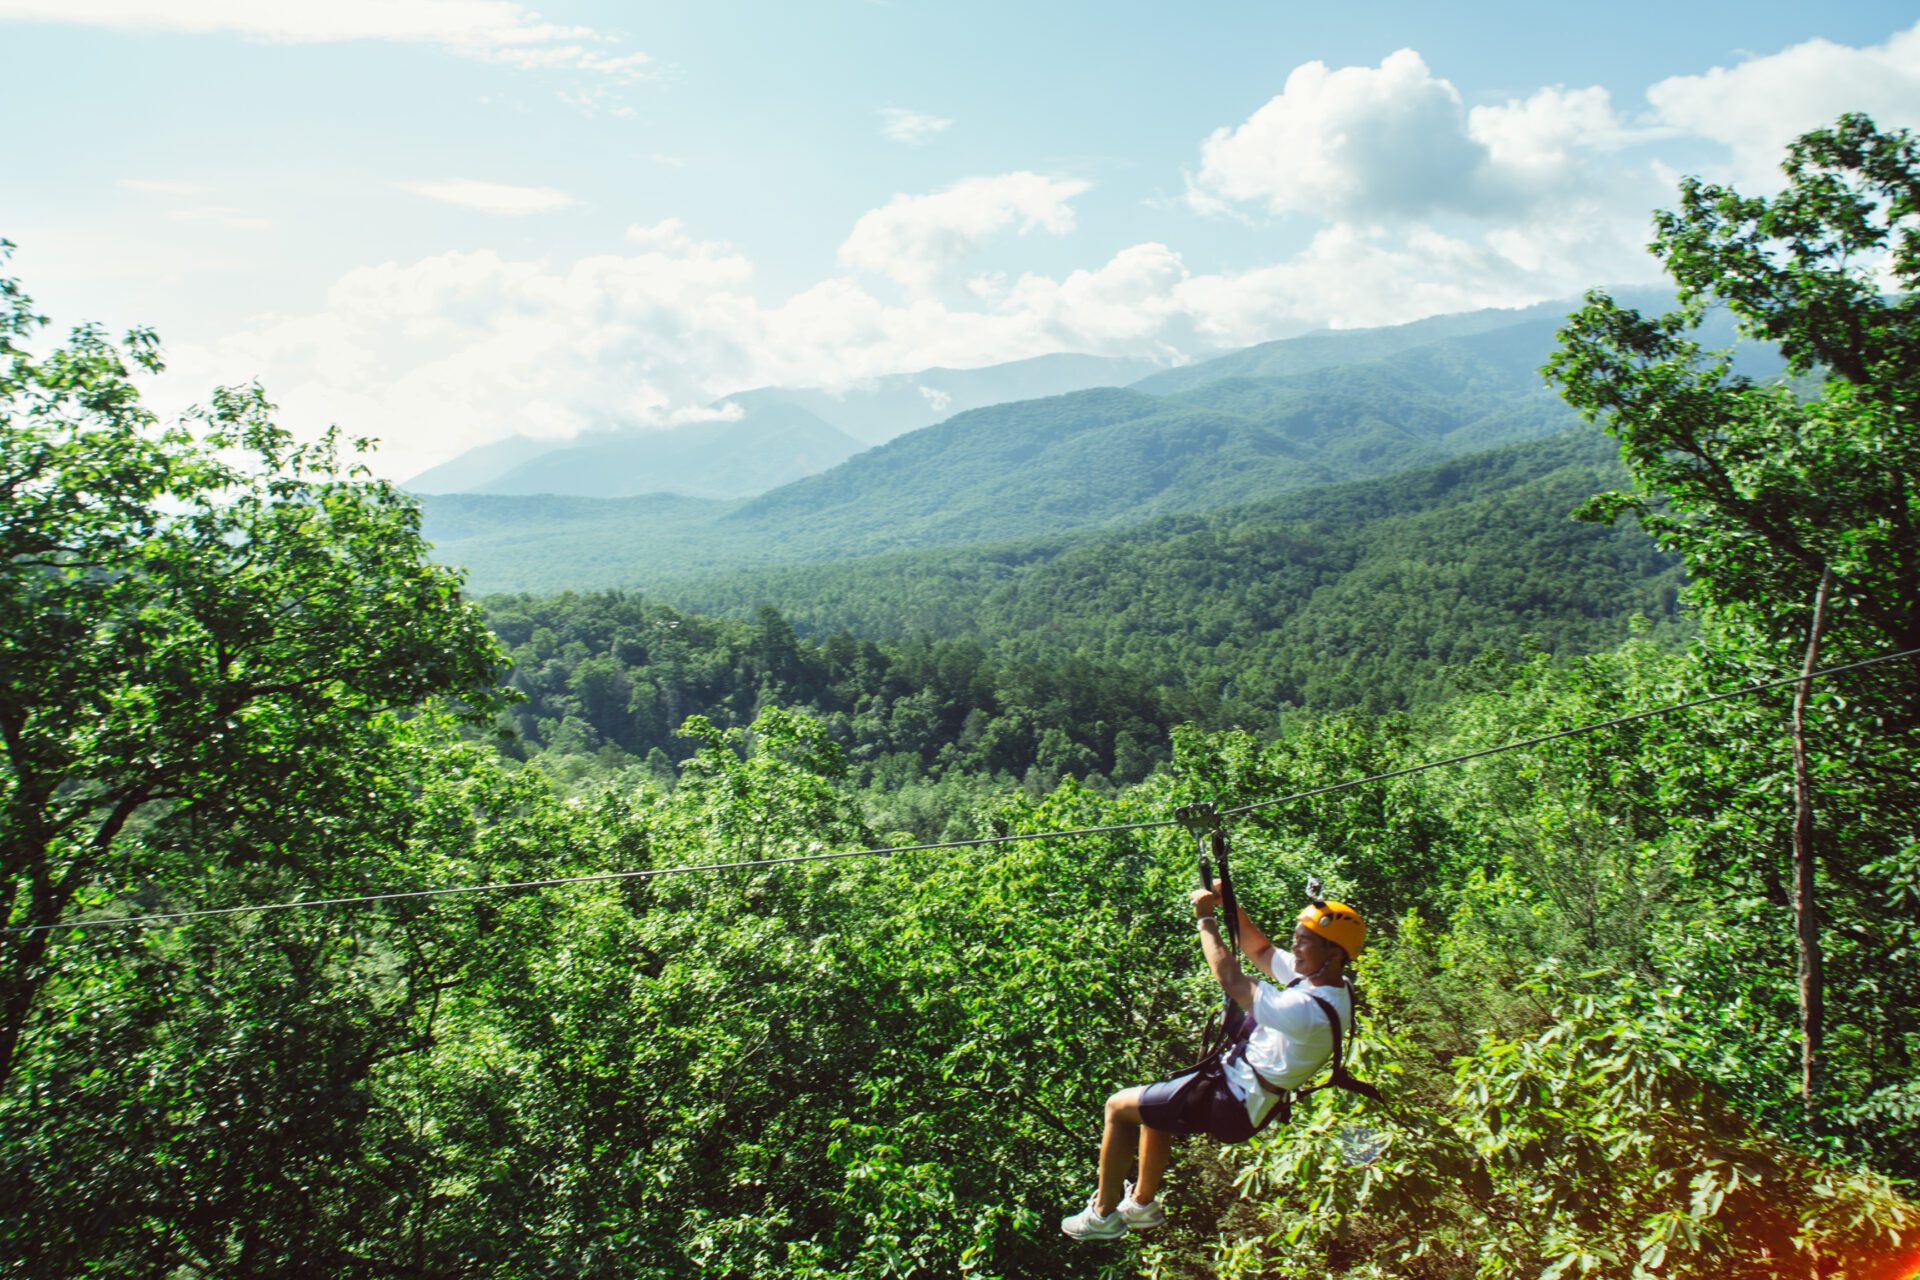 What to Pack for Your Smoky Mountain Zipline Adventure